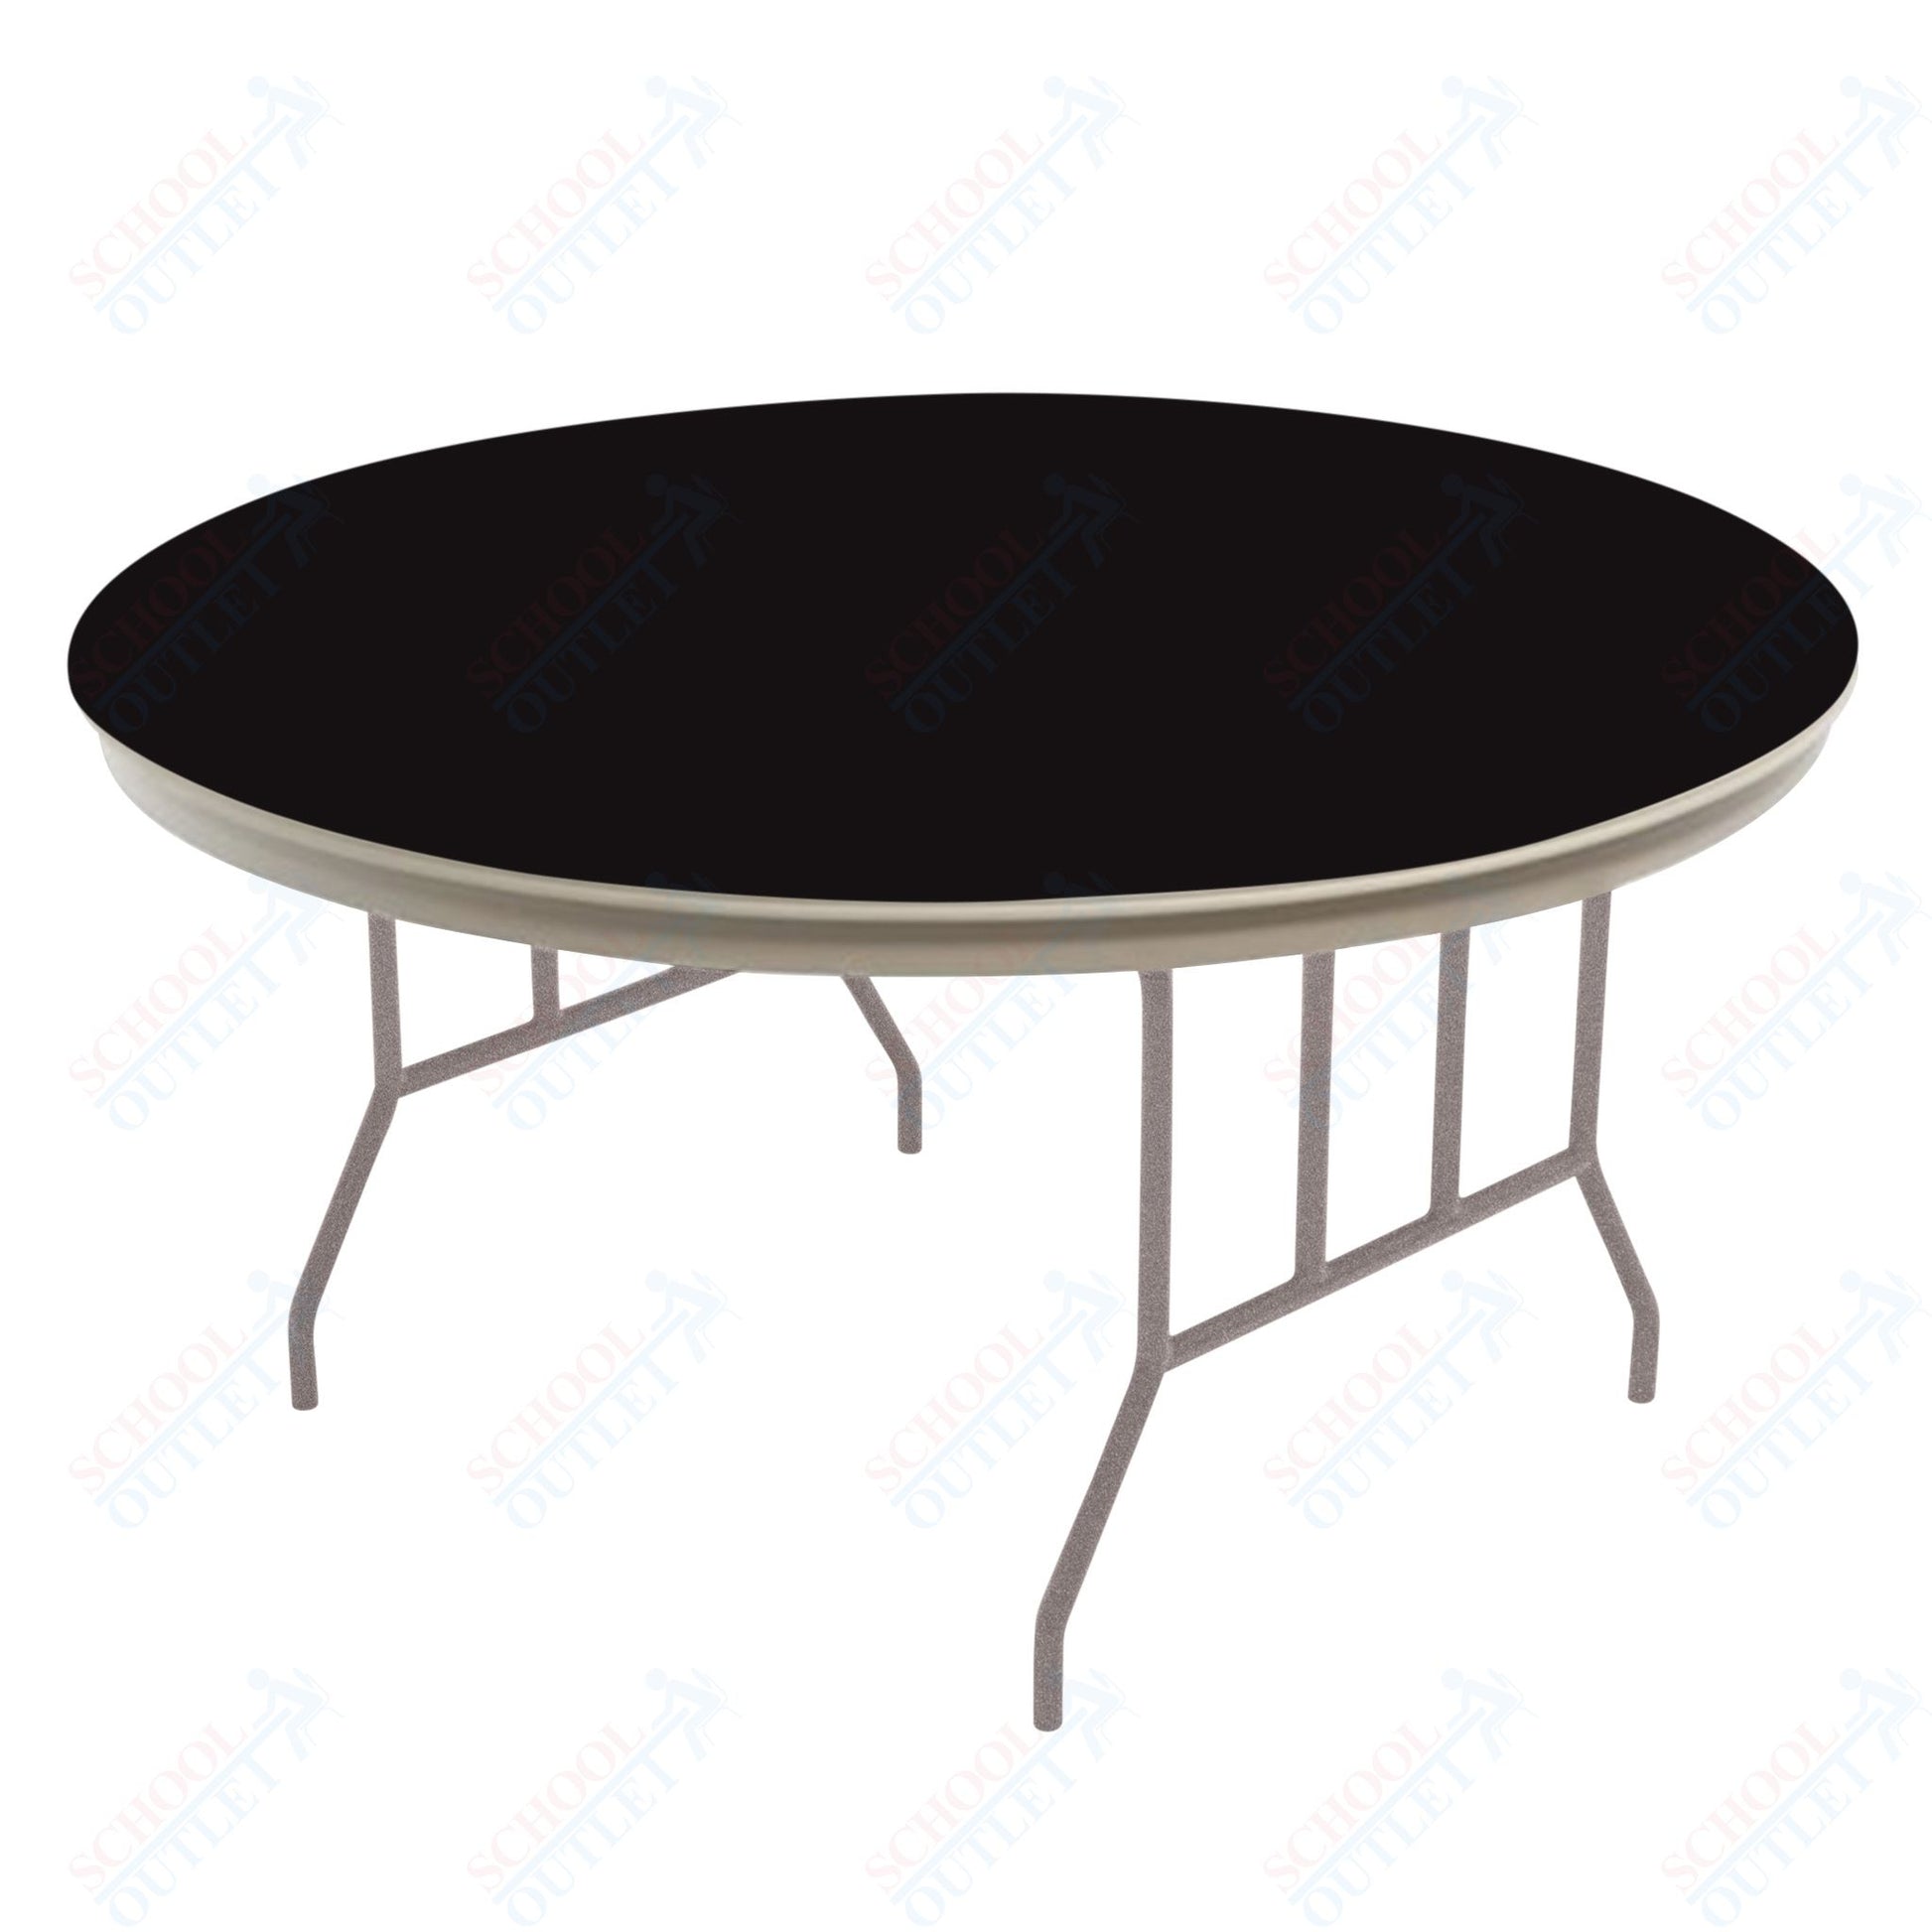 AmTab Dynalite Featherweight Heavy - Duty ABS Plastic Folding Table - Round - 36" Diameter x 29"H (AmTab AMT - R36DL) - SchoolOutlet